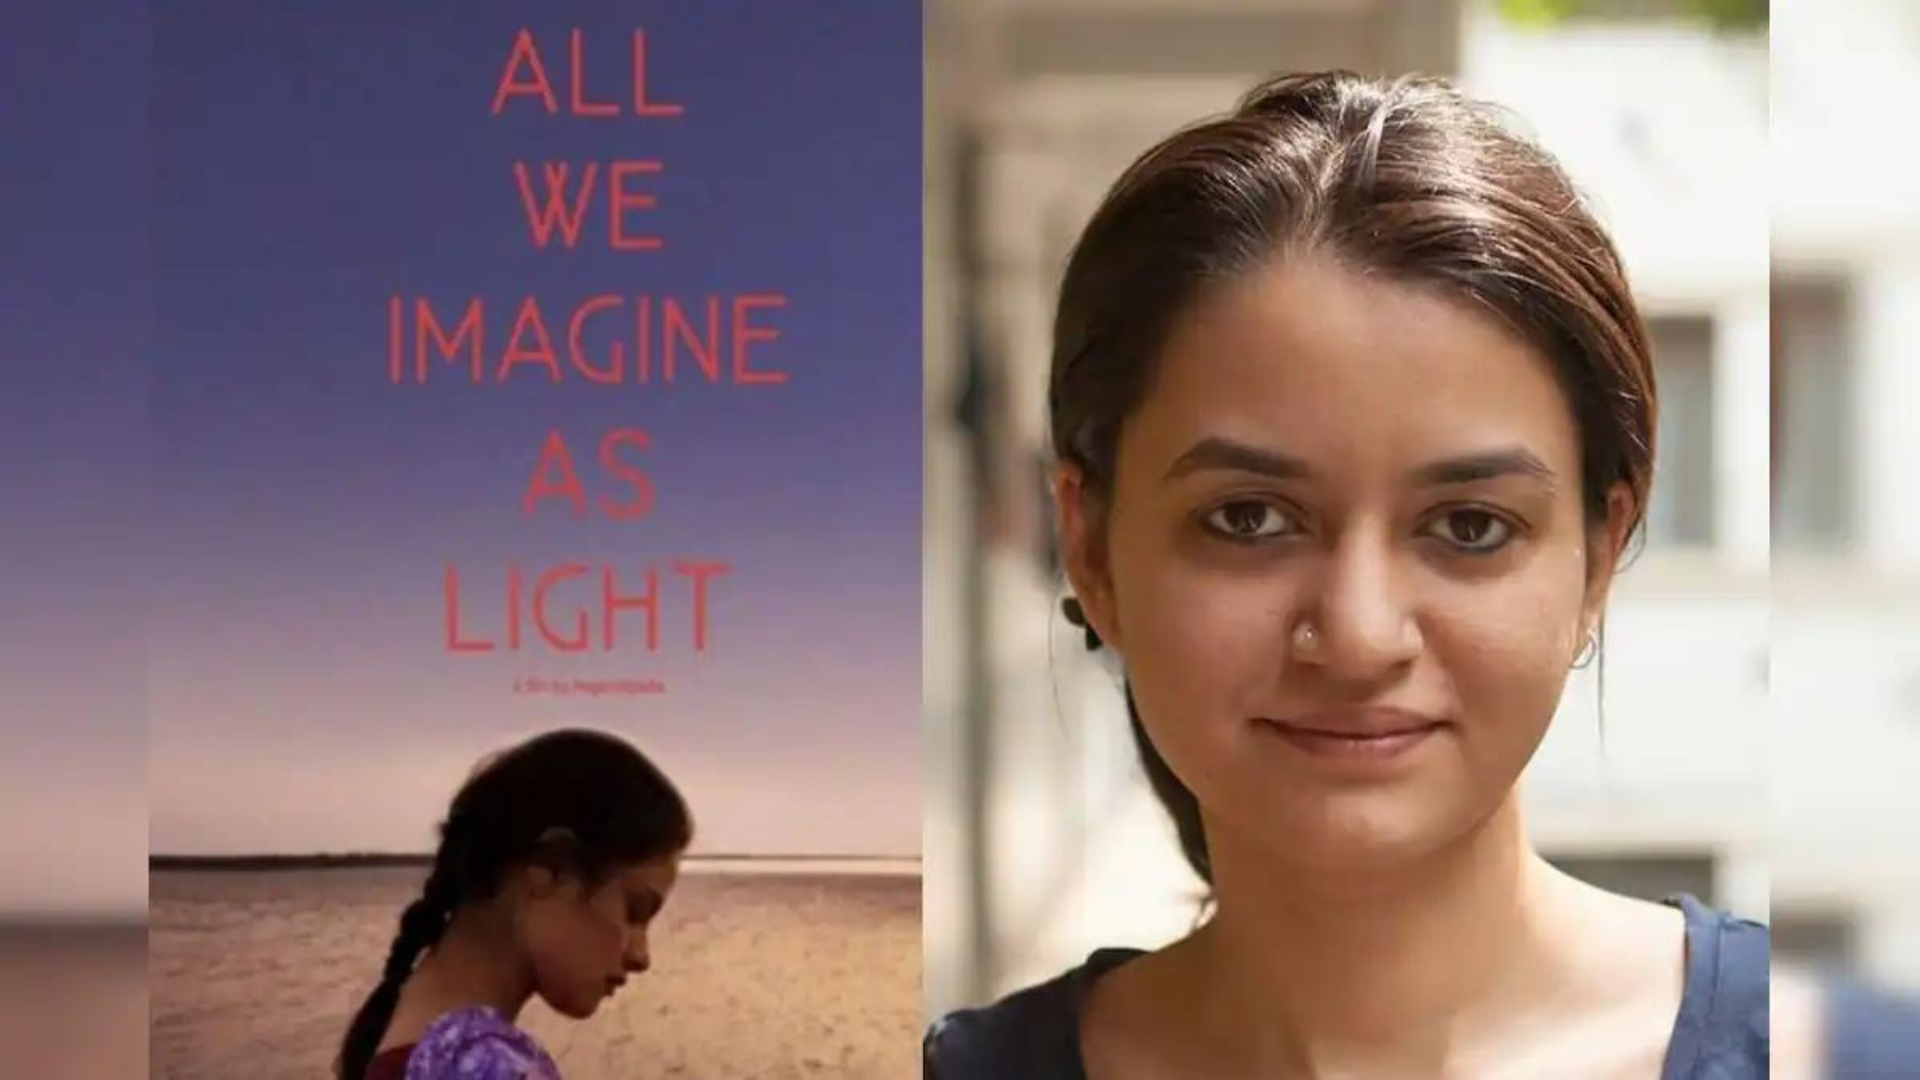 ‘All We Imagine As Light’, directed Payal Kapadia, will be a competitor at the Cannes Film Festival